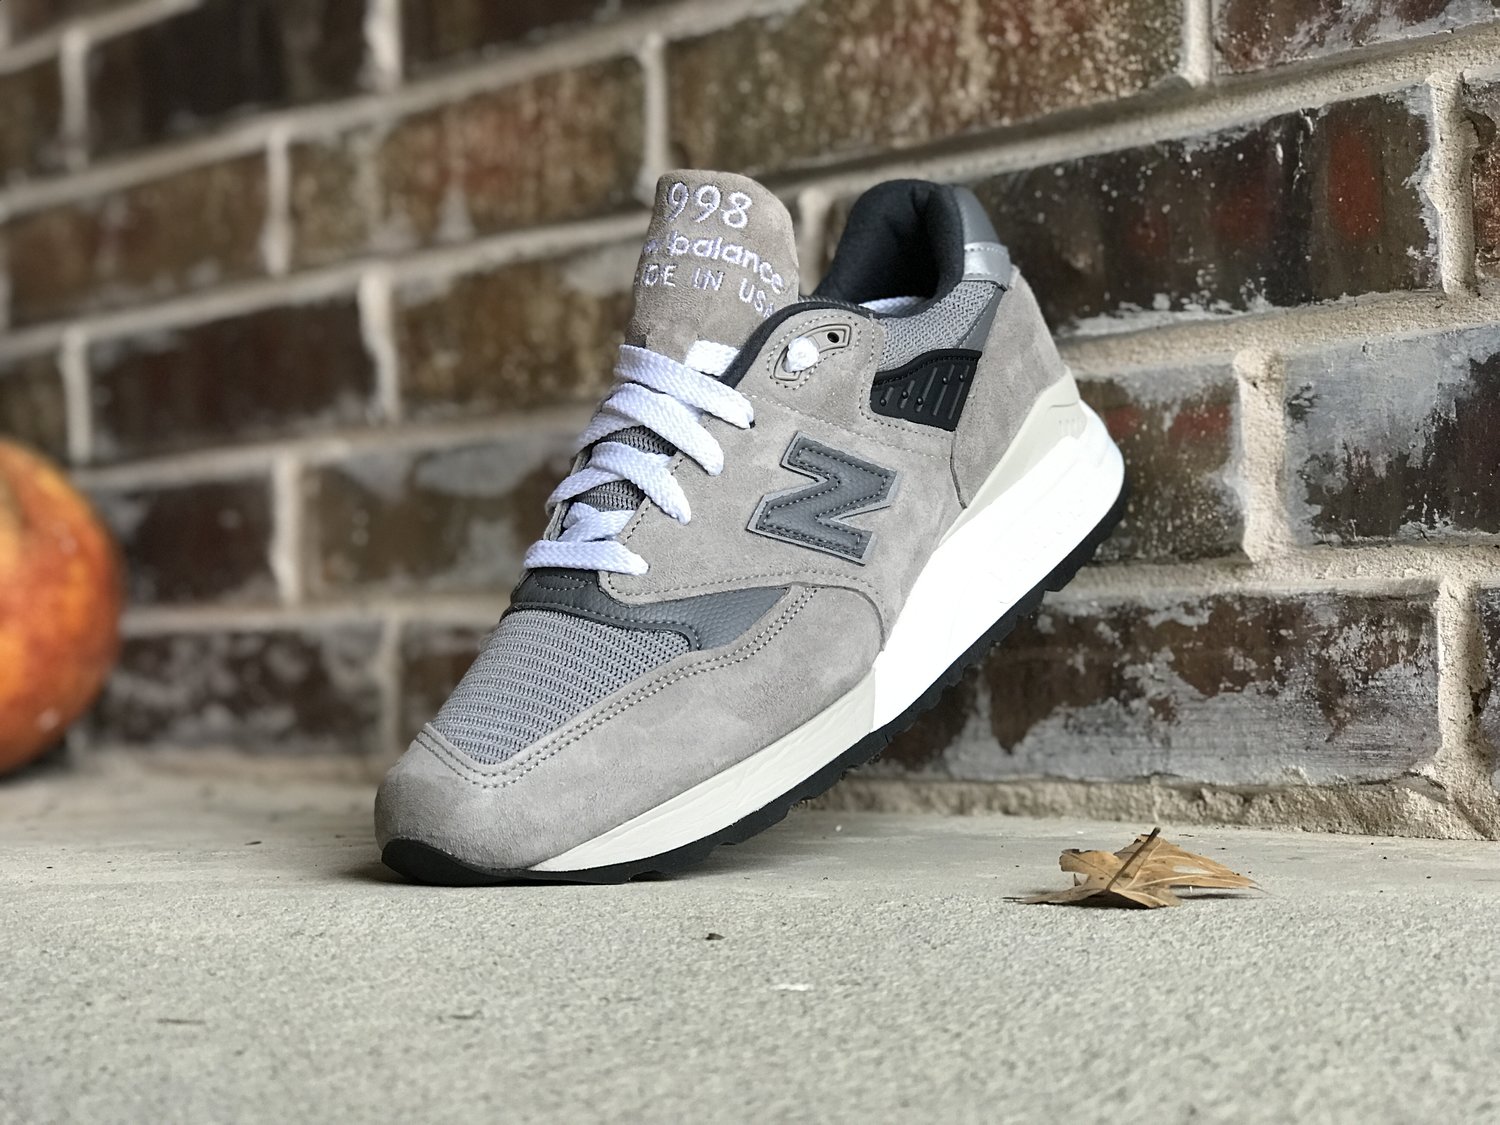 Overgivelse livstid væbner Get A First Look At The New Balance 998 "Cityscape" [Unboxing] | The Retro  Insider